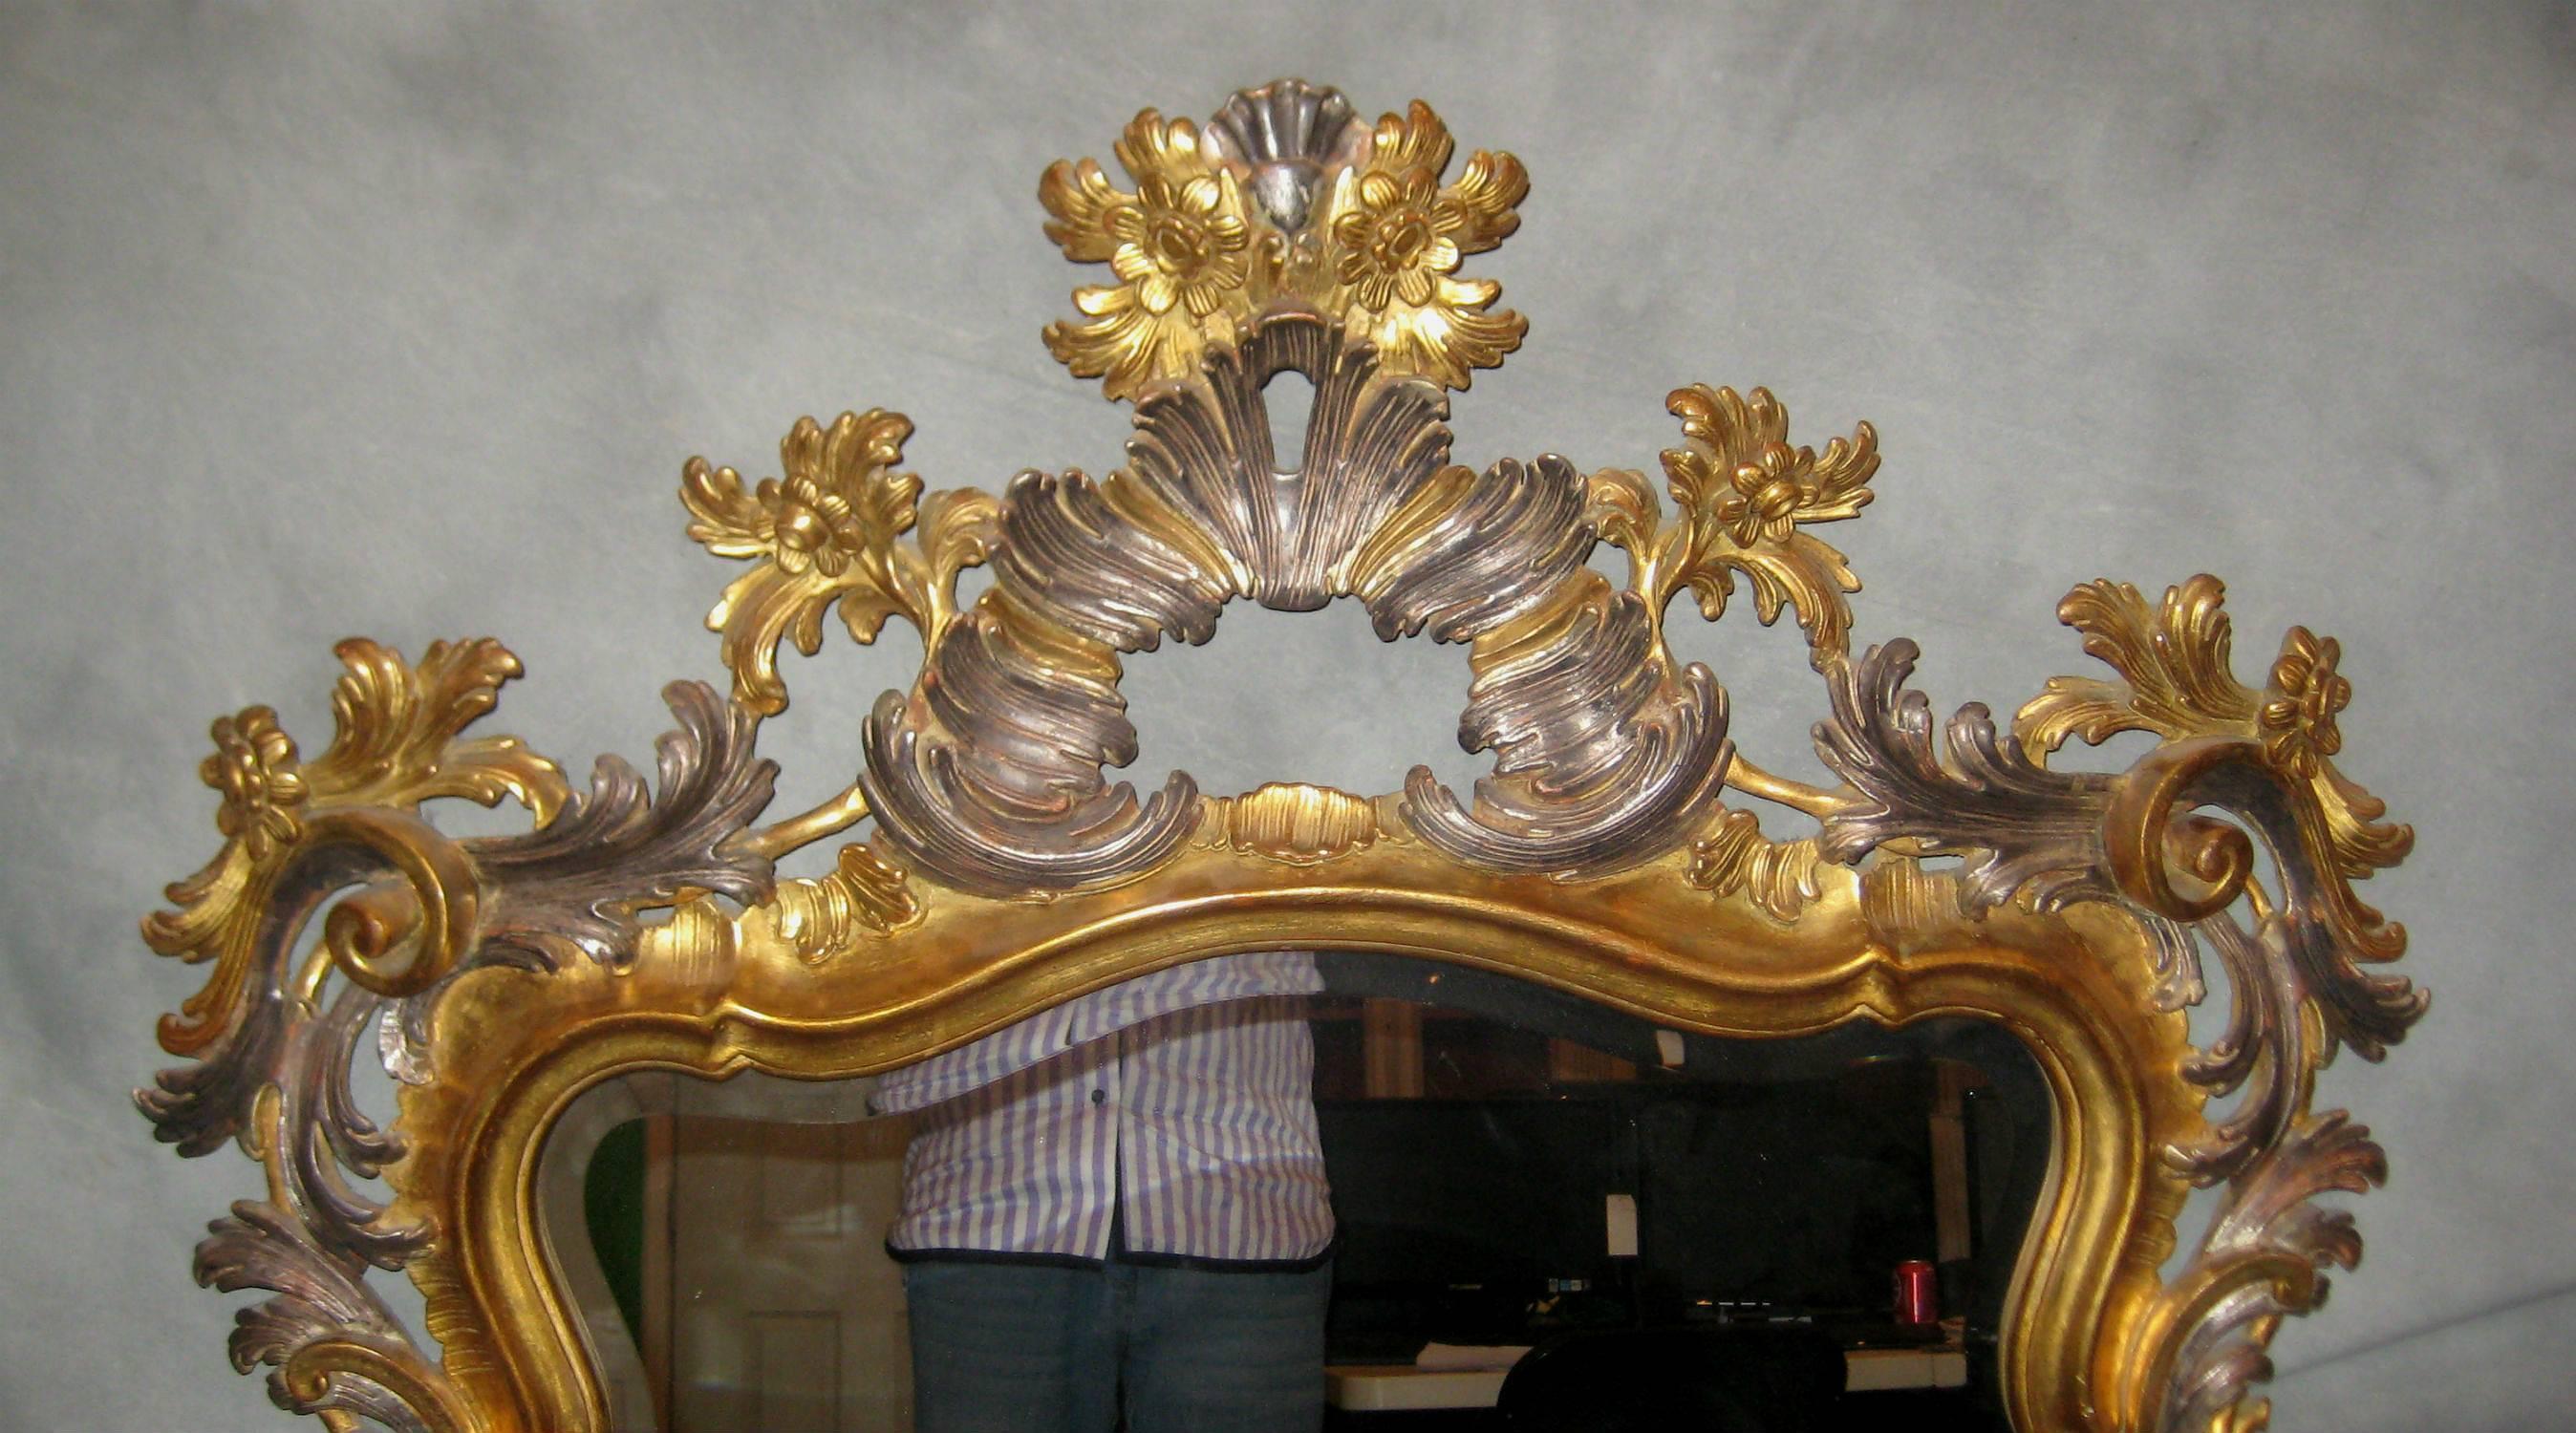 Pair of Rococo style carved gilt-wood and partial silver gilt beveled glass mirrors.

After 43 years of business we are retiring. Everything must be sold. Many of the pieces listed here on 1stdibs represent markdowns below our cost. We thank